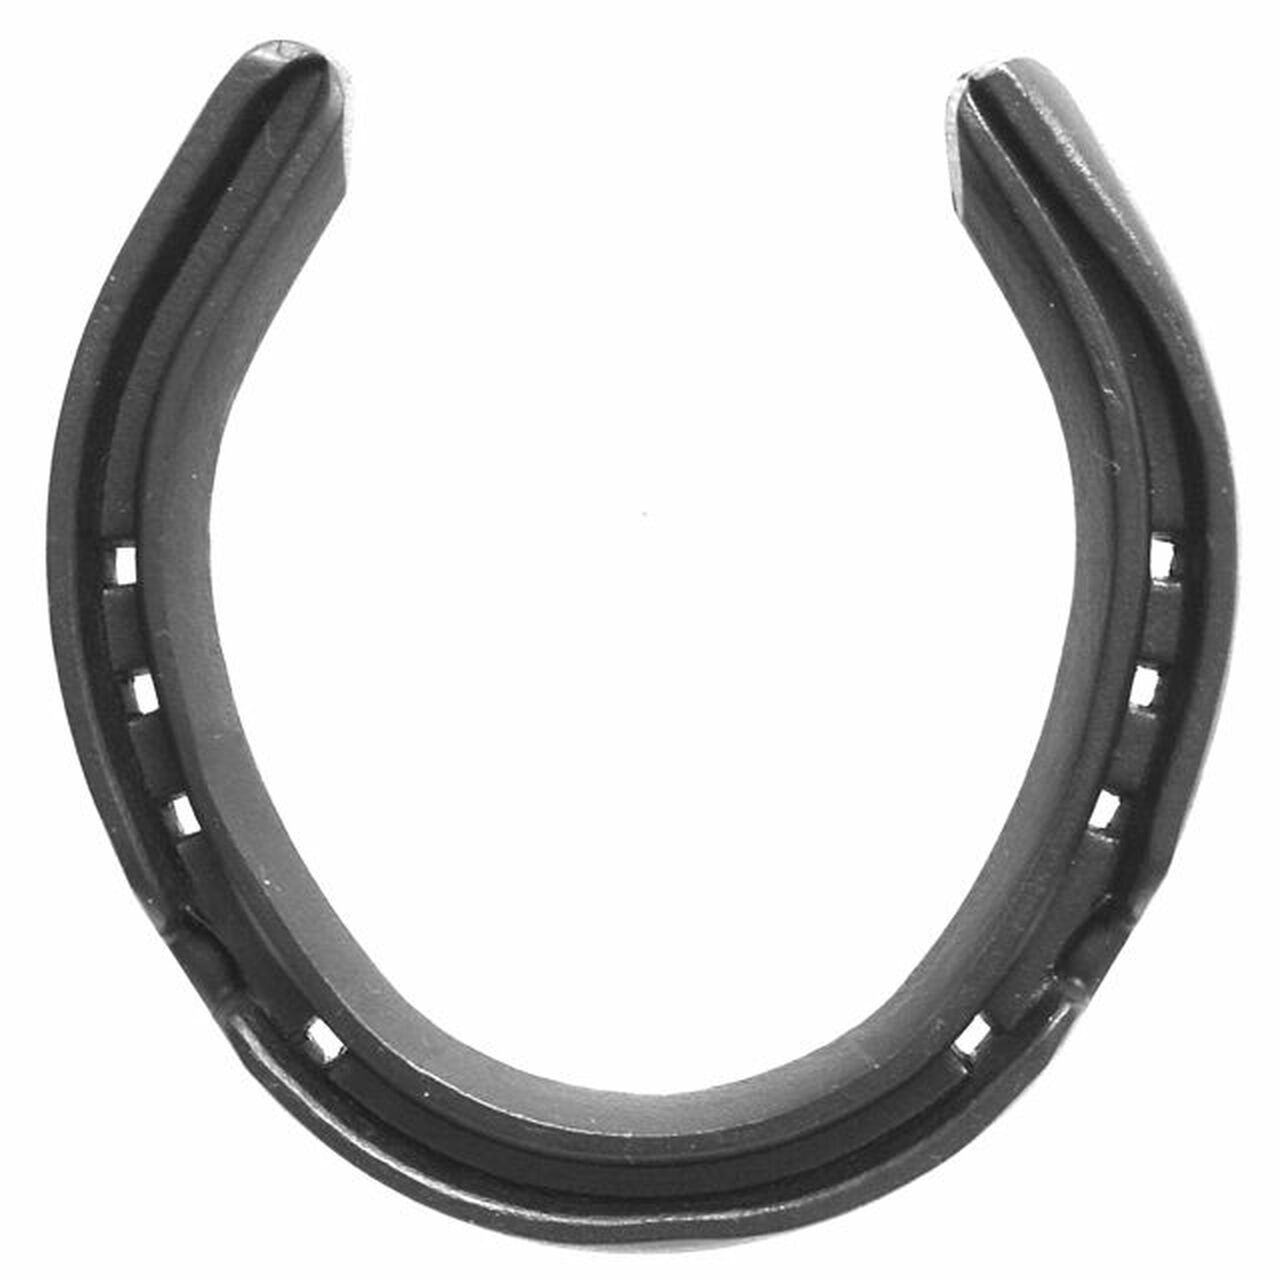 Richard Ash TRADITIONAL CONCAVE 5/8 x 3/8 - Front and hinds Upright Heels (CLIPPED AND UNCLIPPED